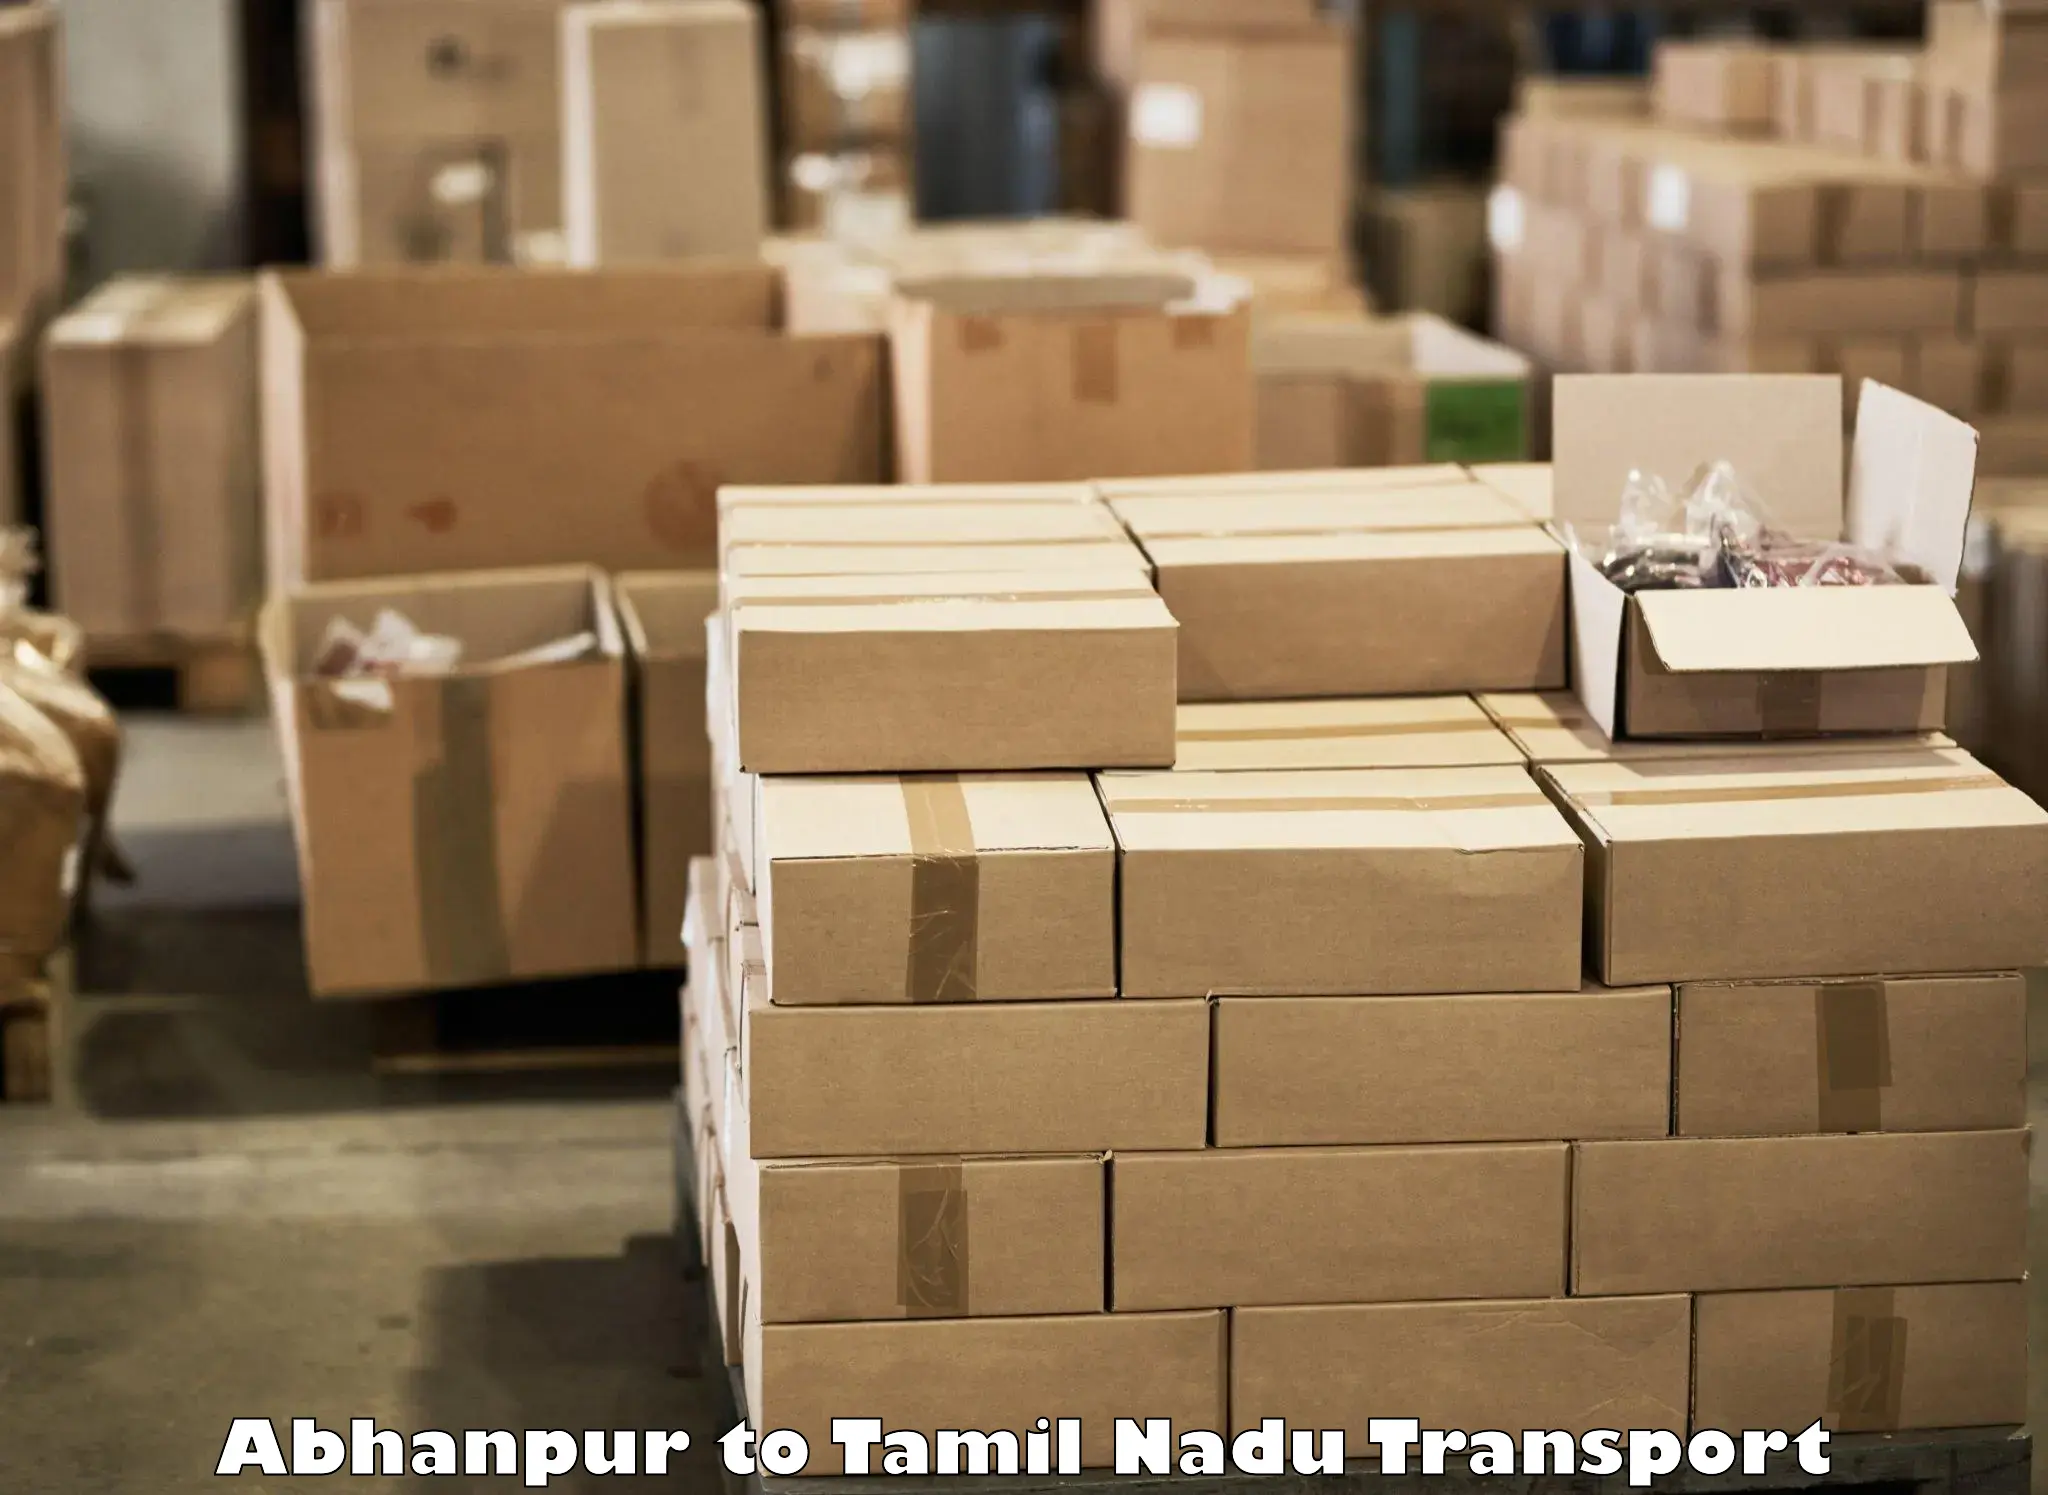 Truck transport companies in India Abhanpur to IIT Madras